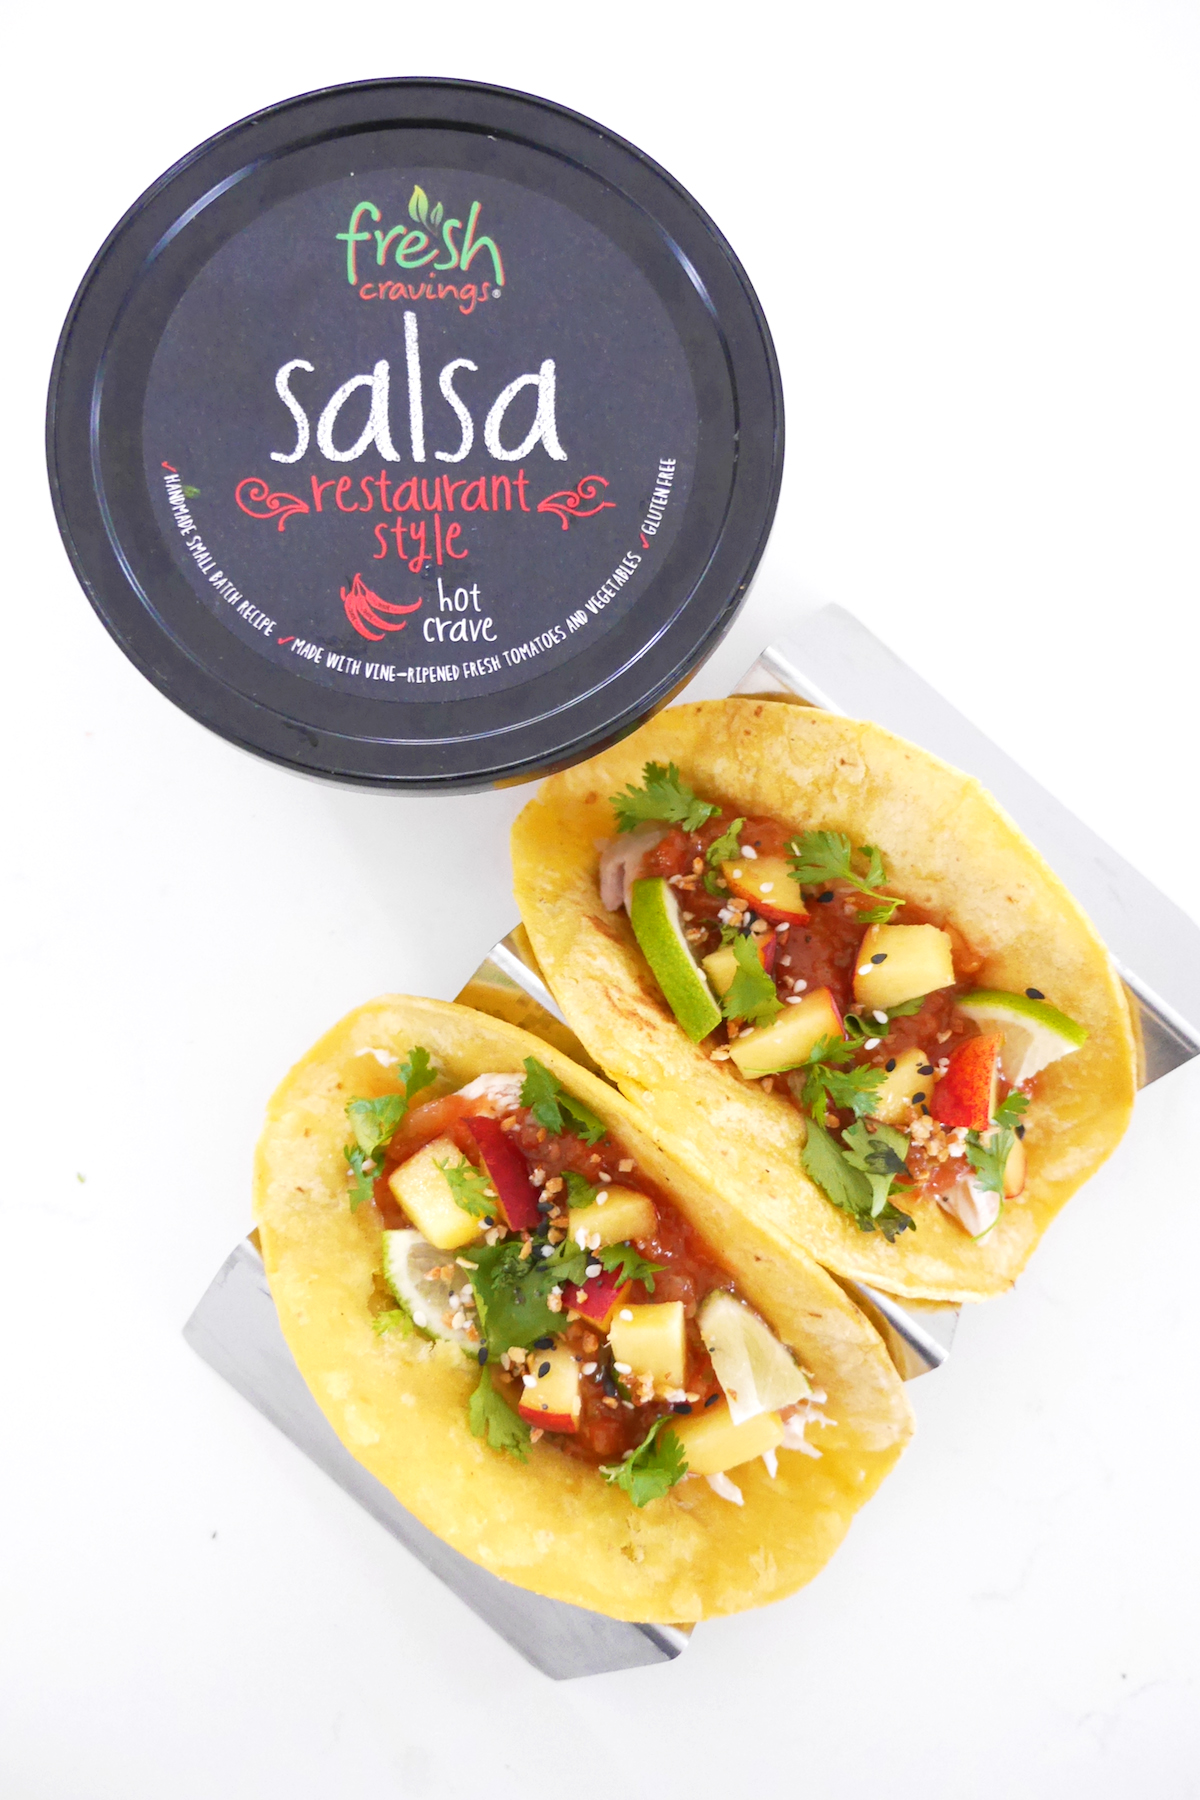 Fresh Cravings Salsa and plant-based dips